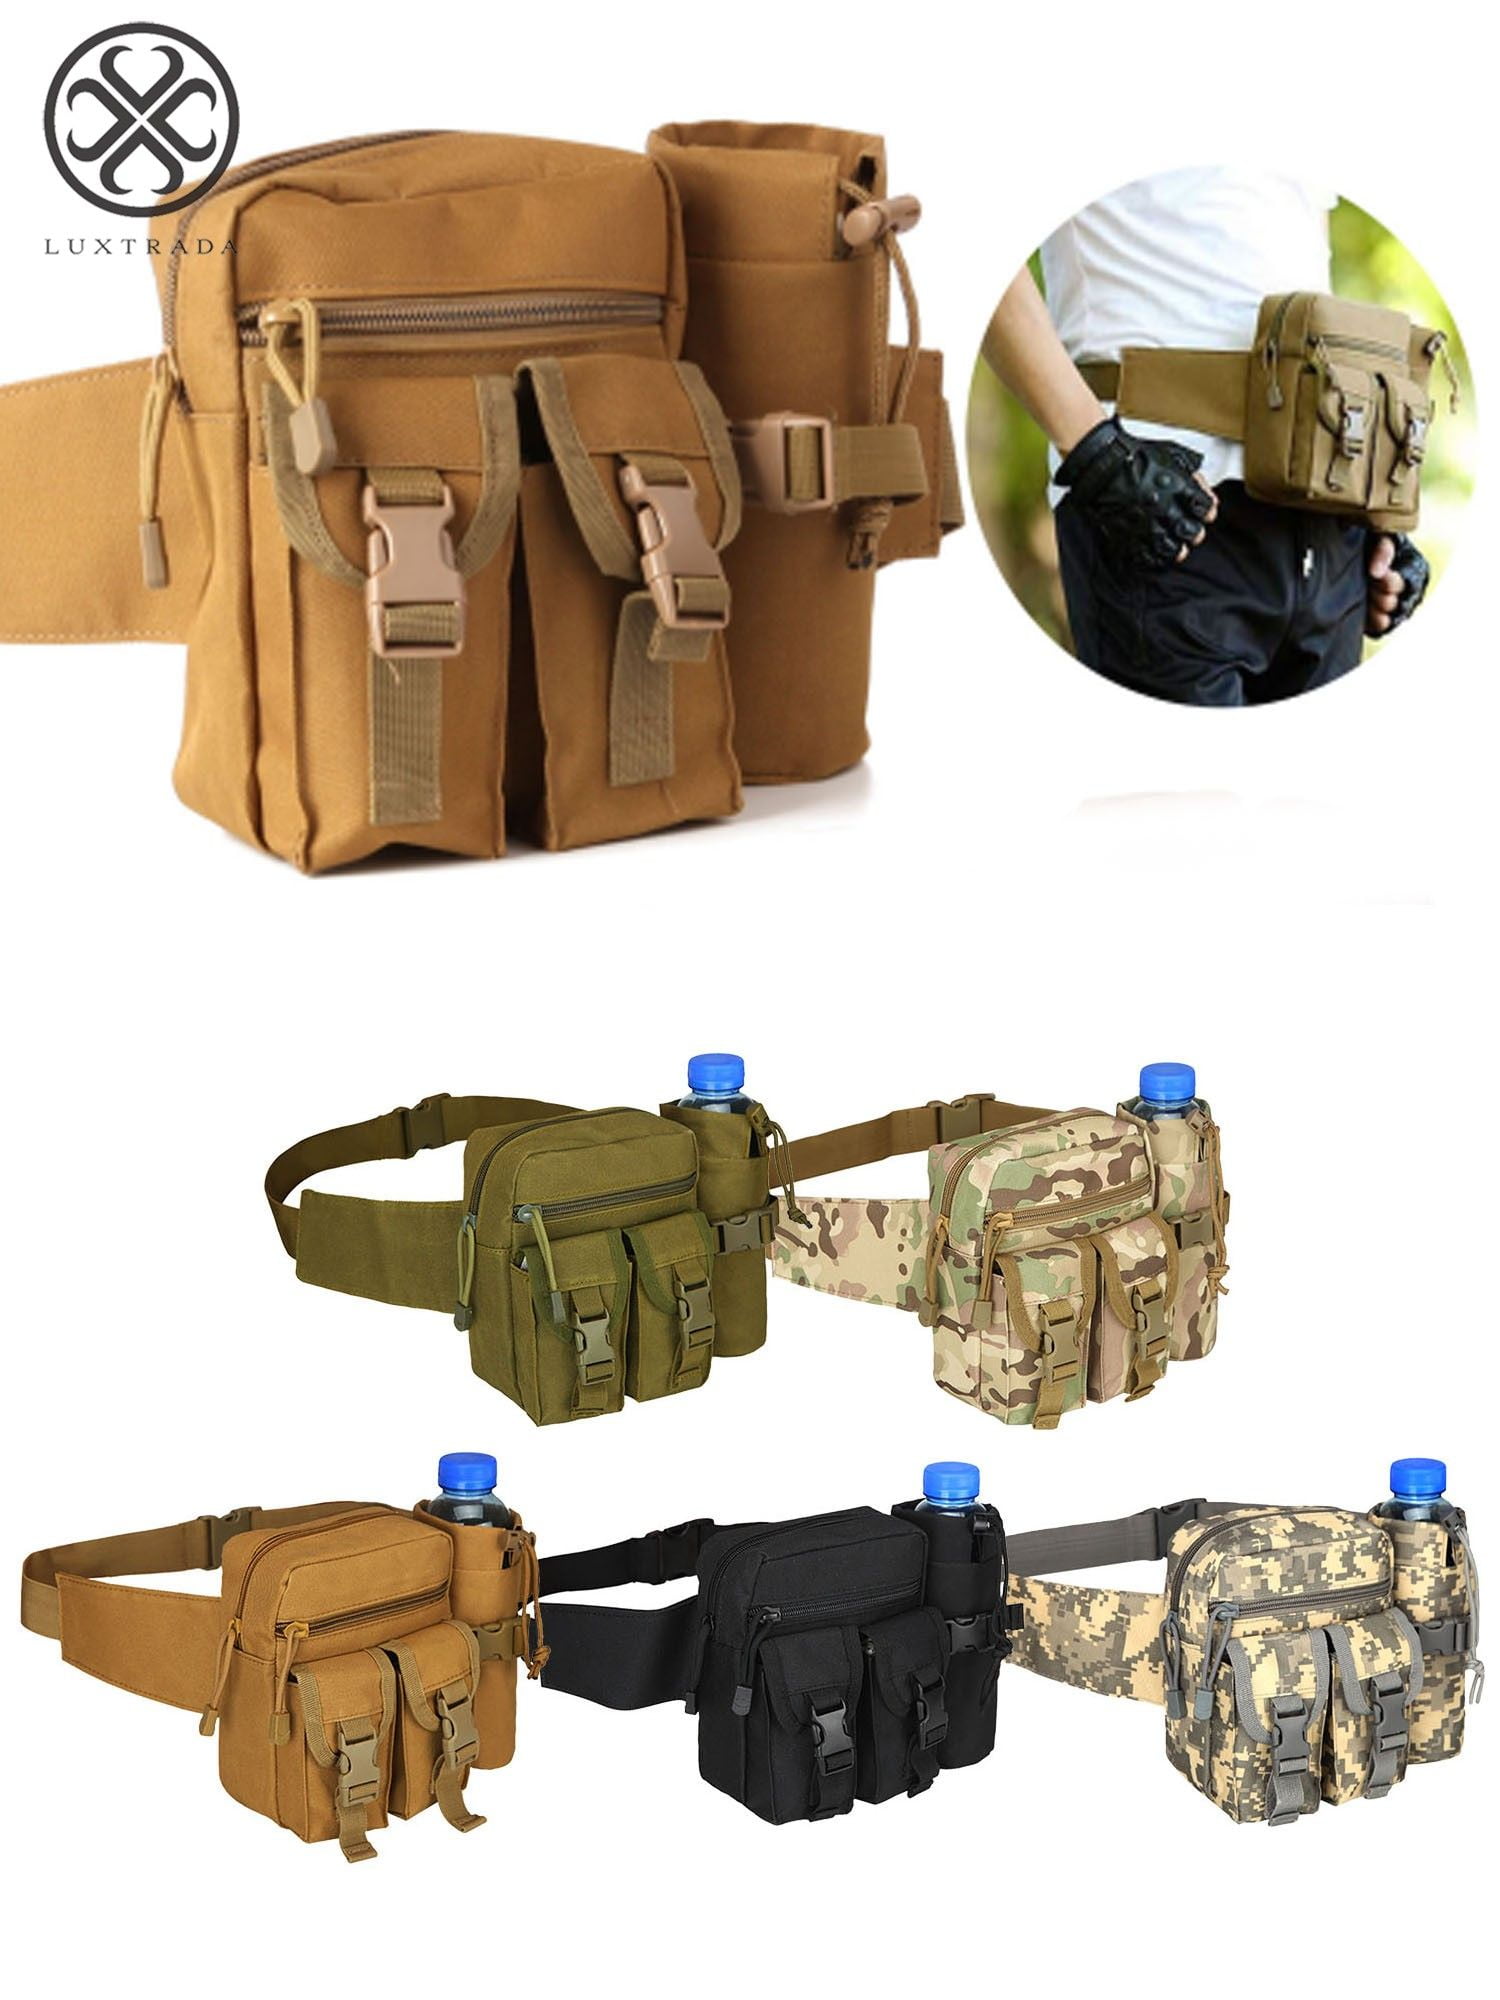 Tactical Molle Pouch Camping Hiking Bag Large Capacity Waist Pack US STOCK 